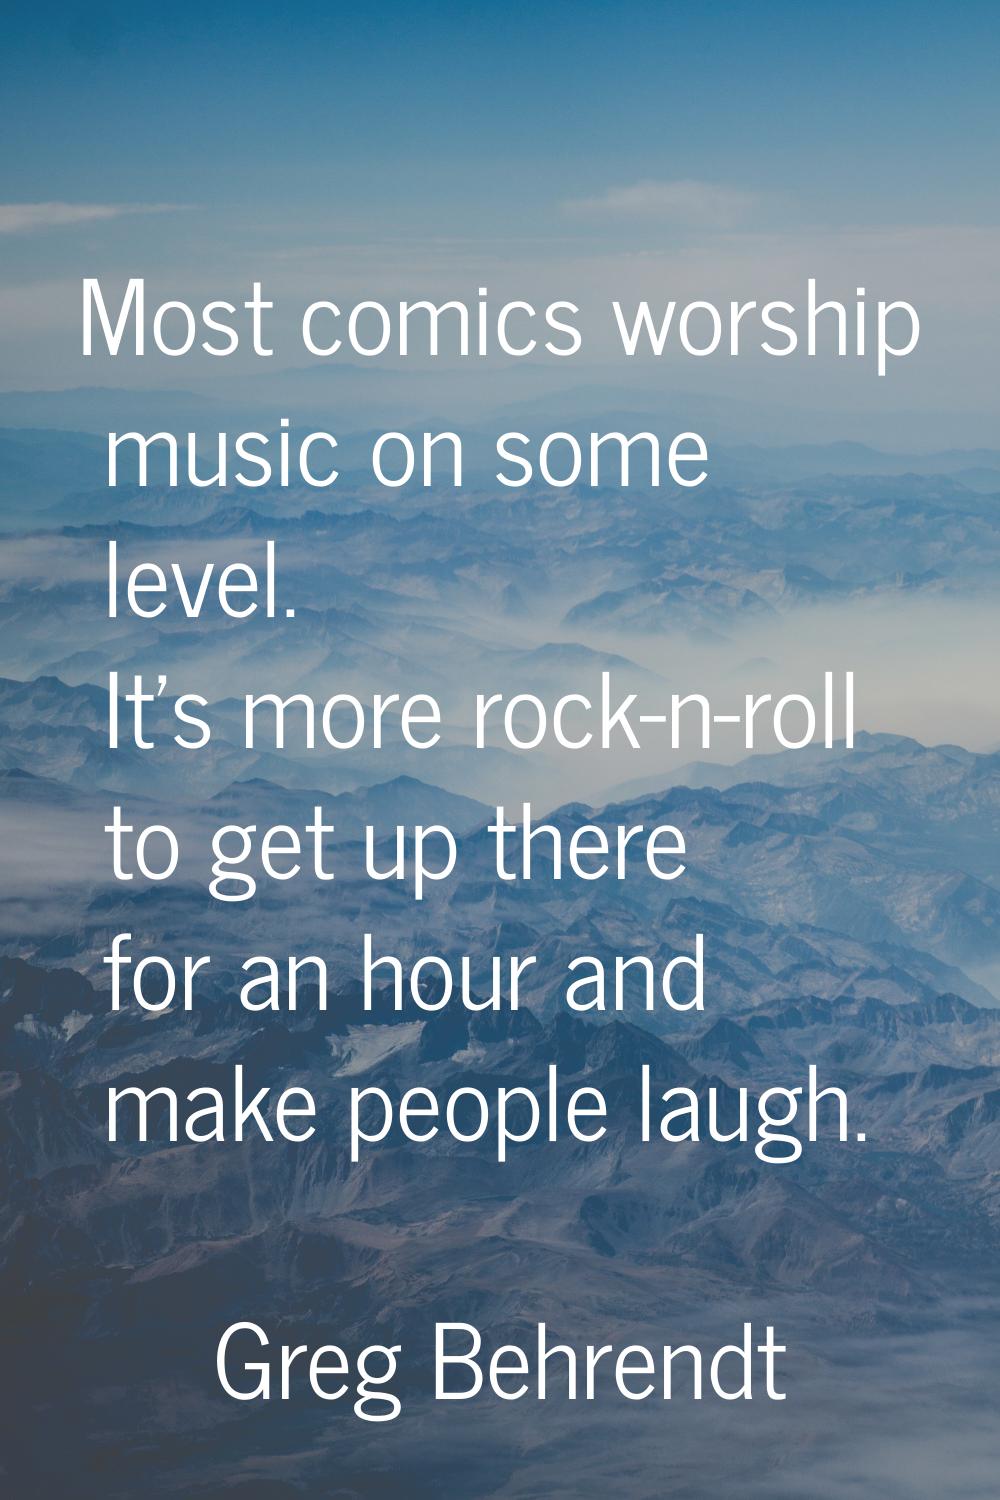 Most comics worship music on some level. It's more rock-n-roll to get up there for an hour and make